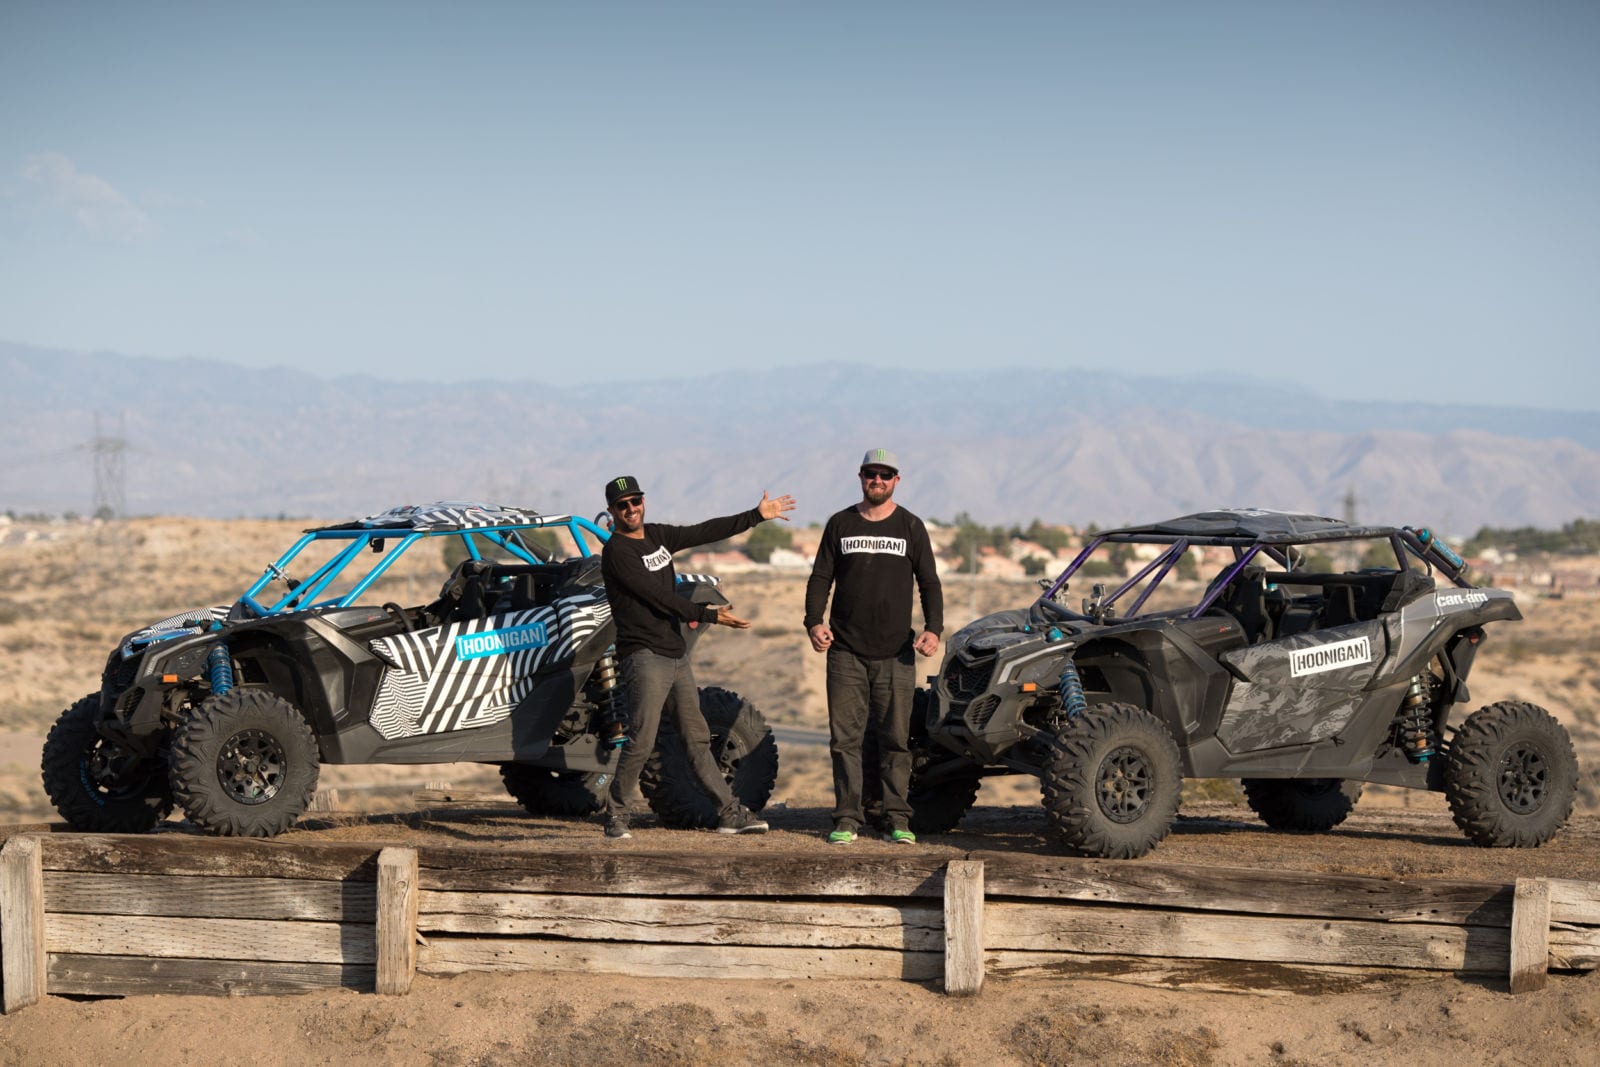 Battle BROyale featuring the 2017 Can-Am Maverick X3